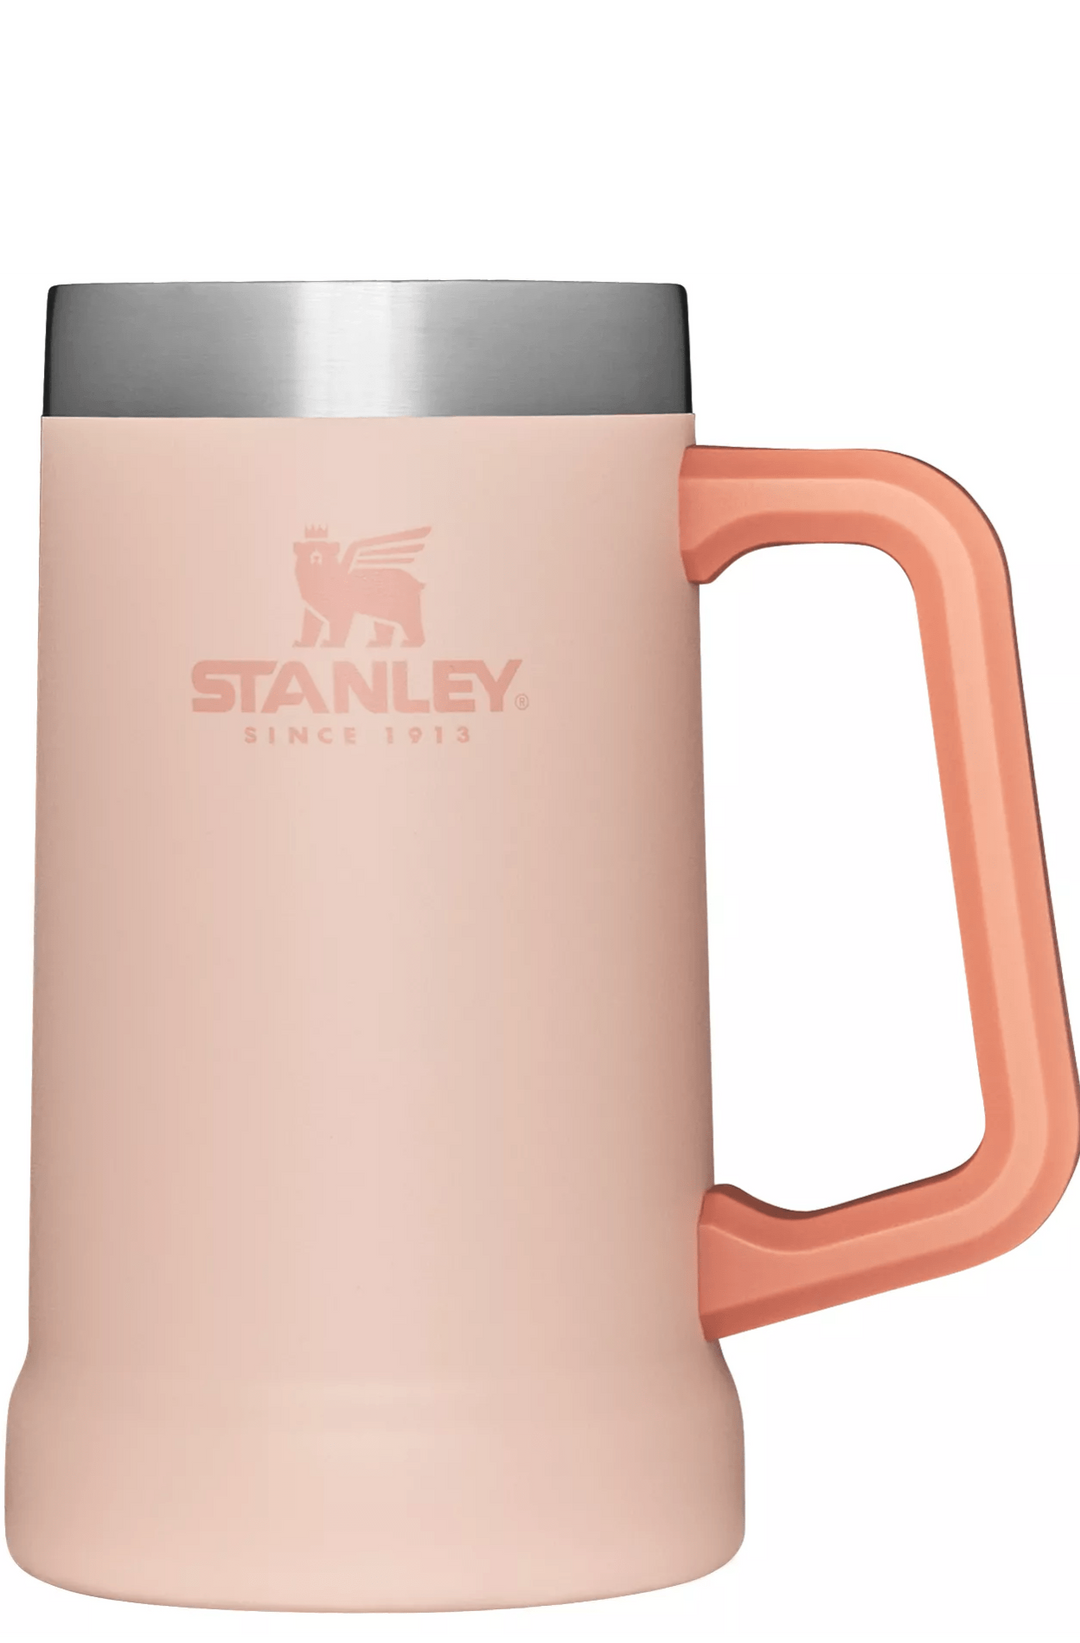 stanley pitcher with the #steins for the drinks #cheladas #cheladasan